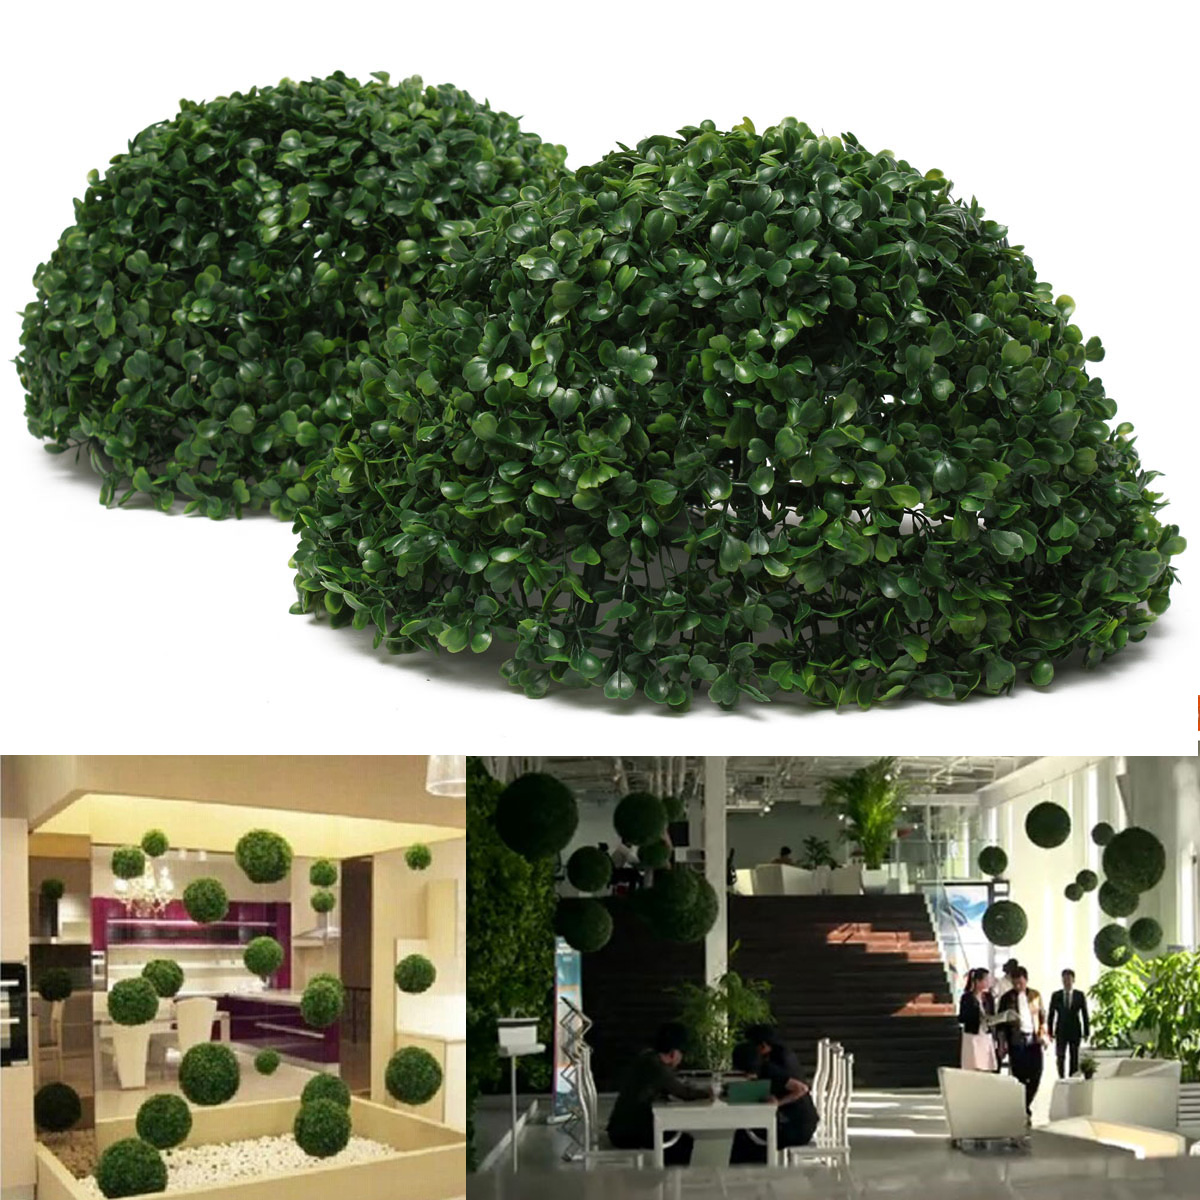 35cm-Plastic-Artificial-Topiary-Grass-Ball-Leaf-Effect-Ball-Wedding-Gardening-Hanging-Decoration-1036994-2